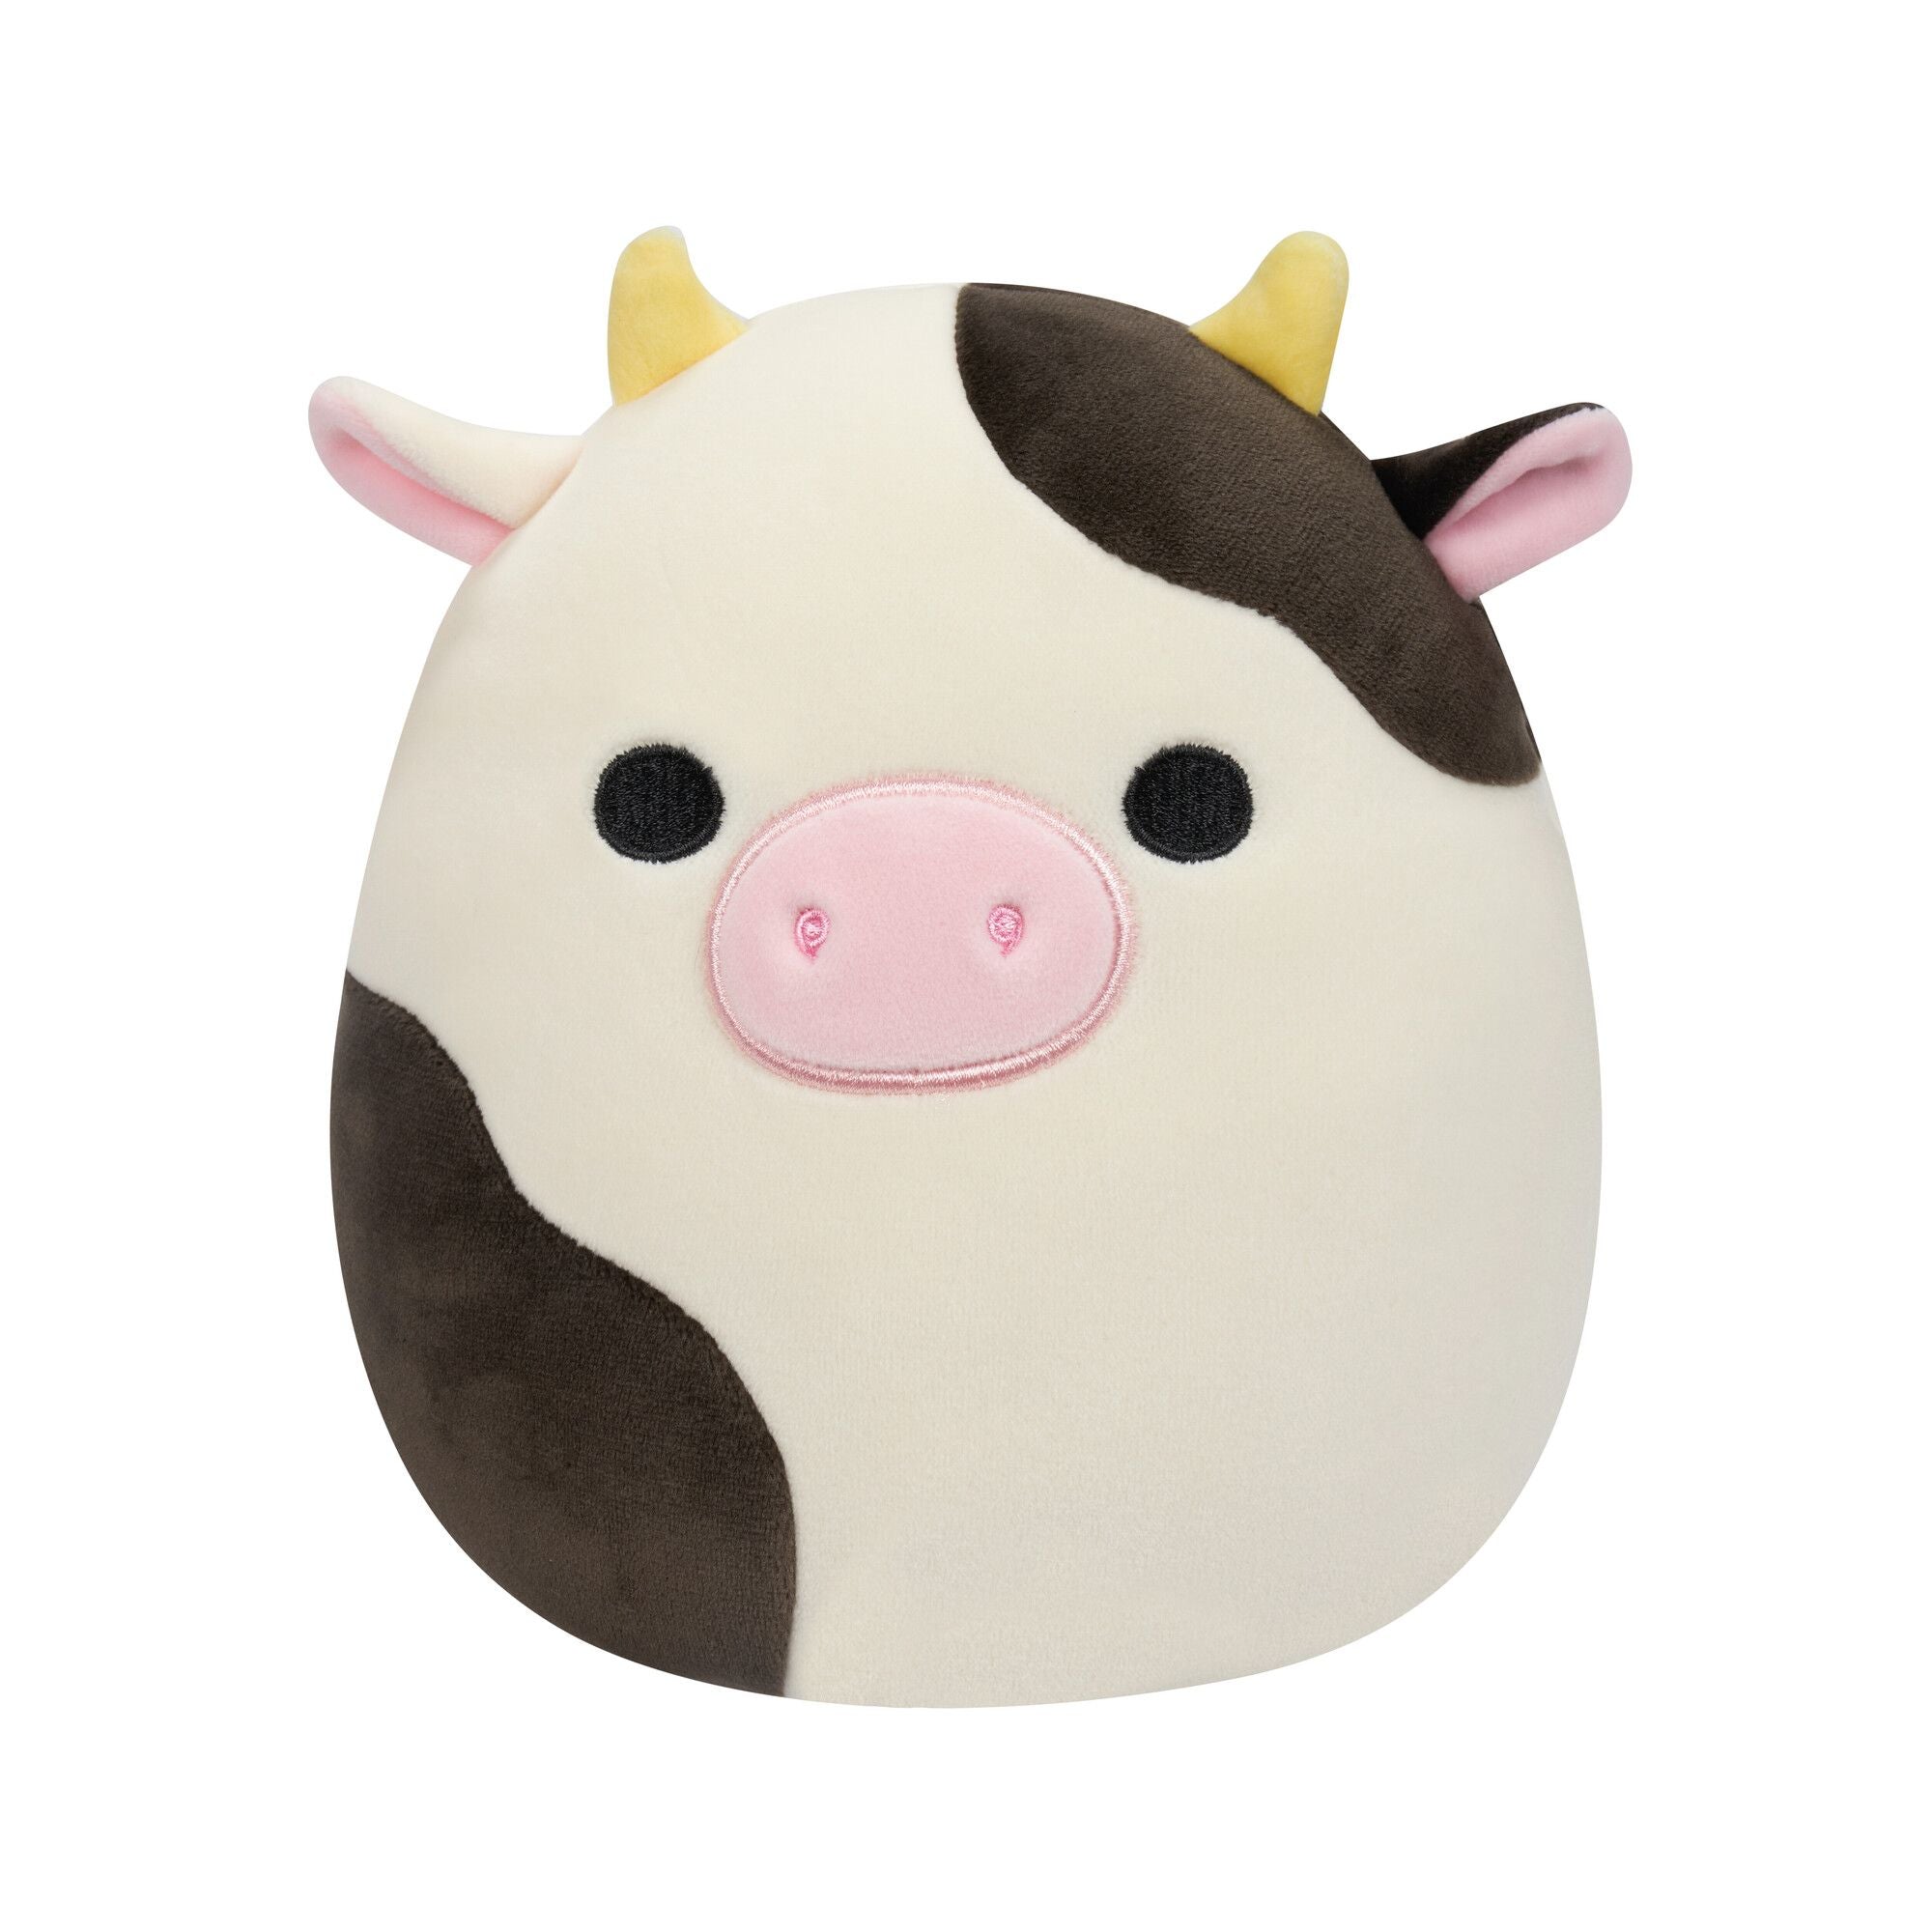 Squishmallow KellyToy Plush 7.5" Connor The Cow